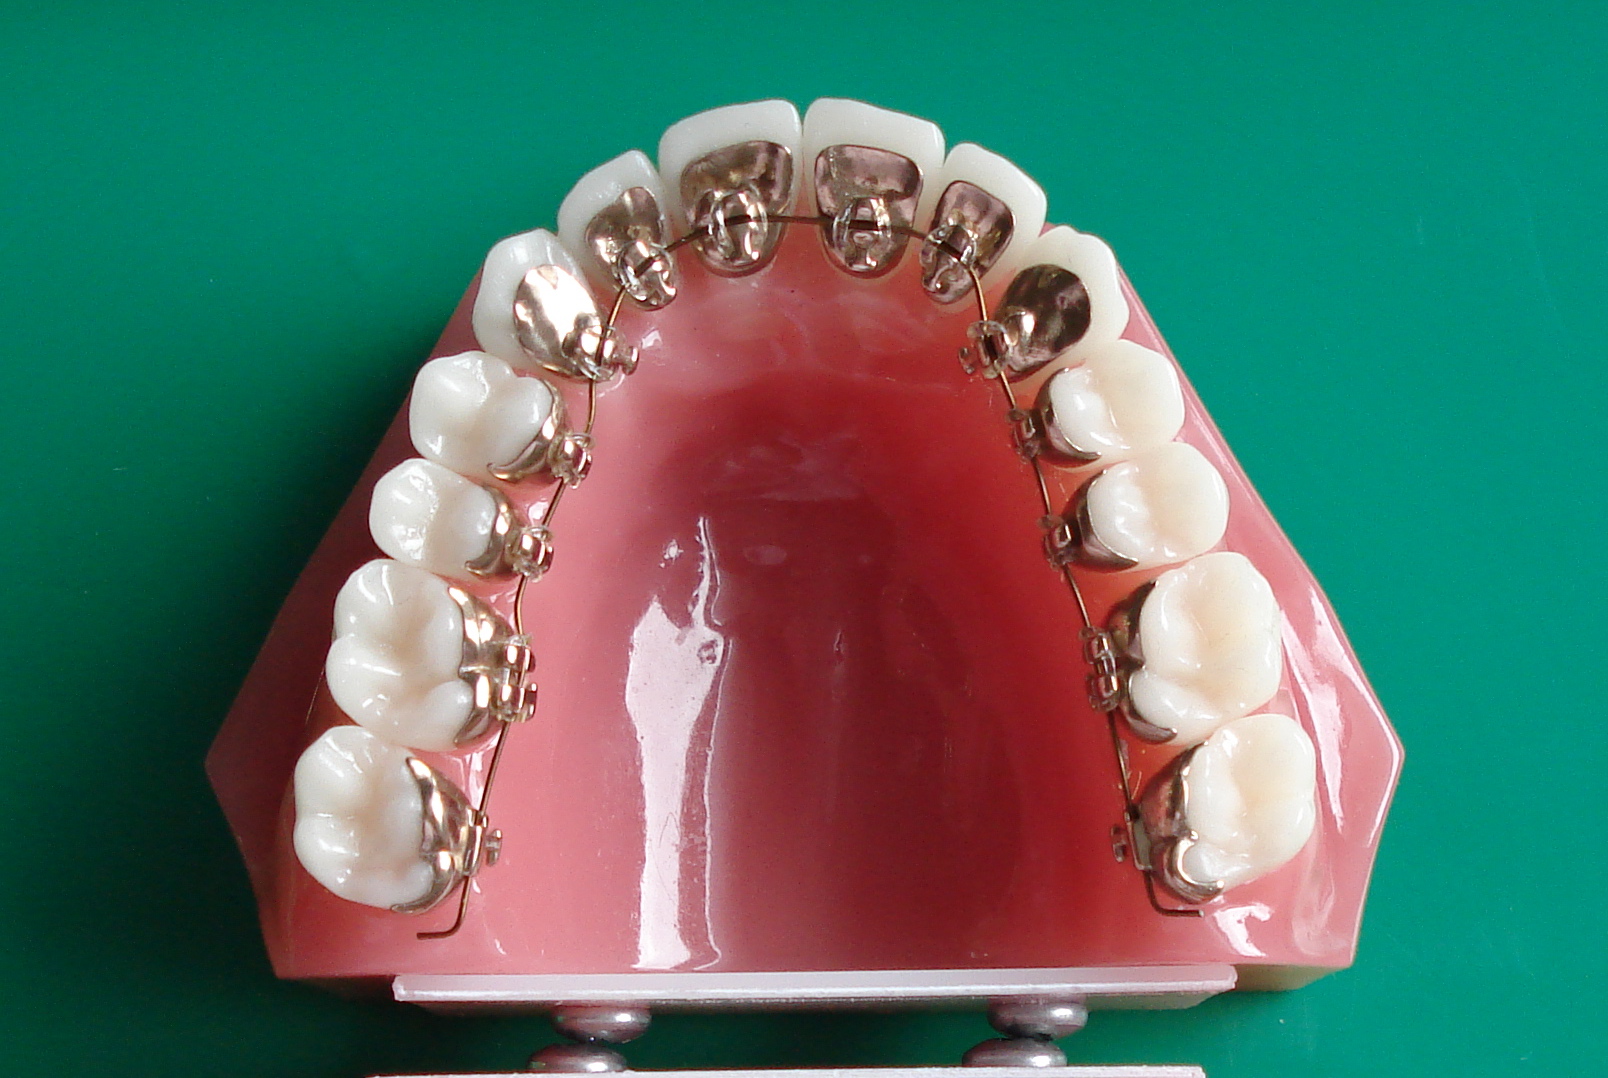 Closeup of a single arch Incognito Lingual Braces mounted on a plastic teeth..